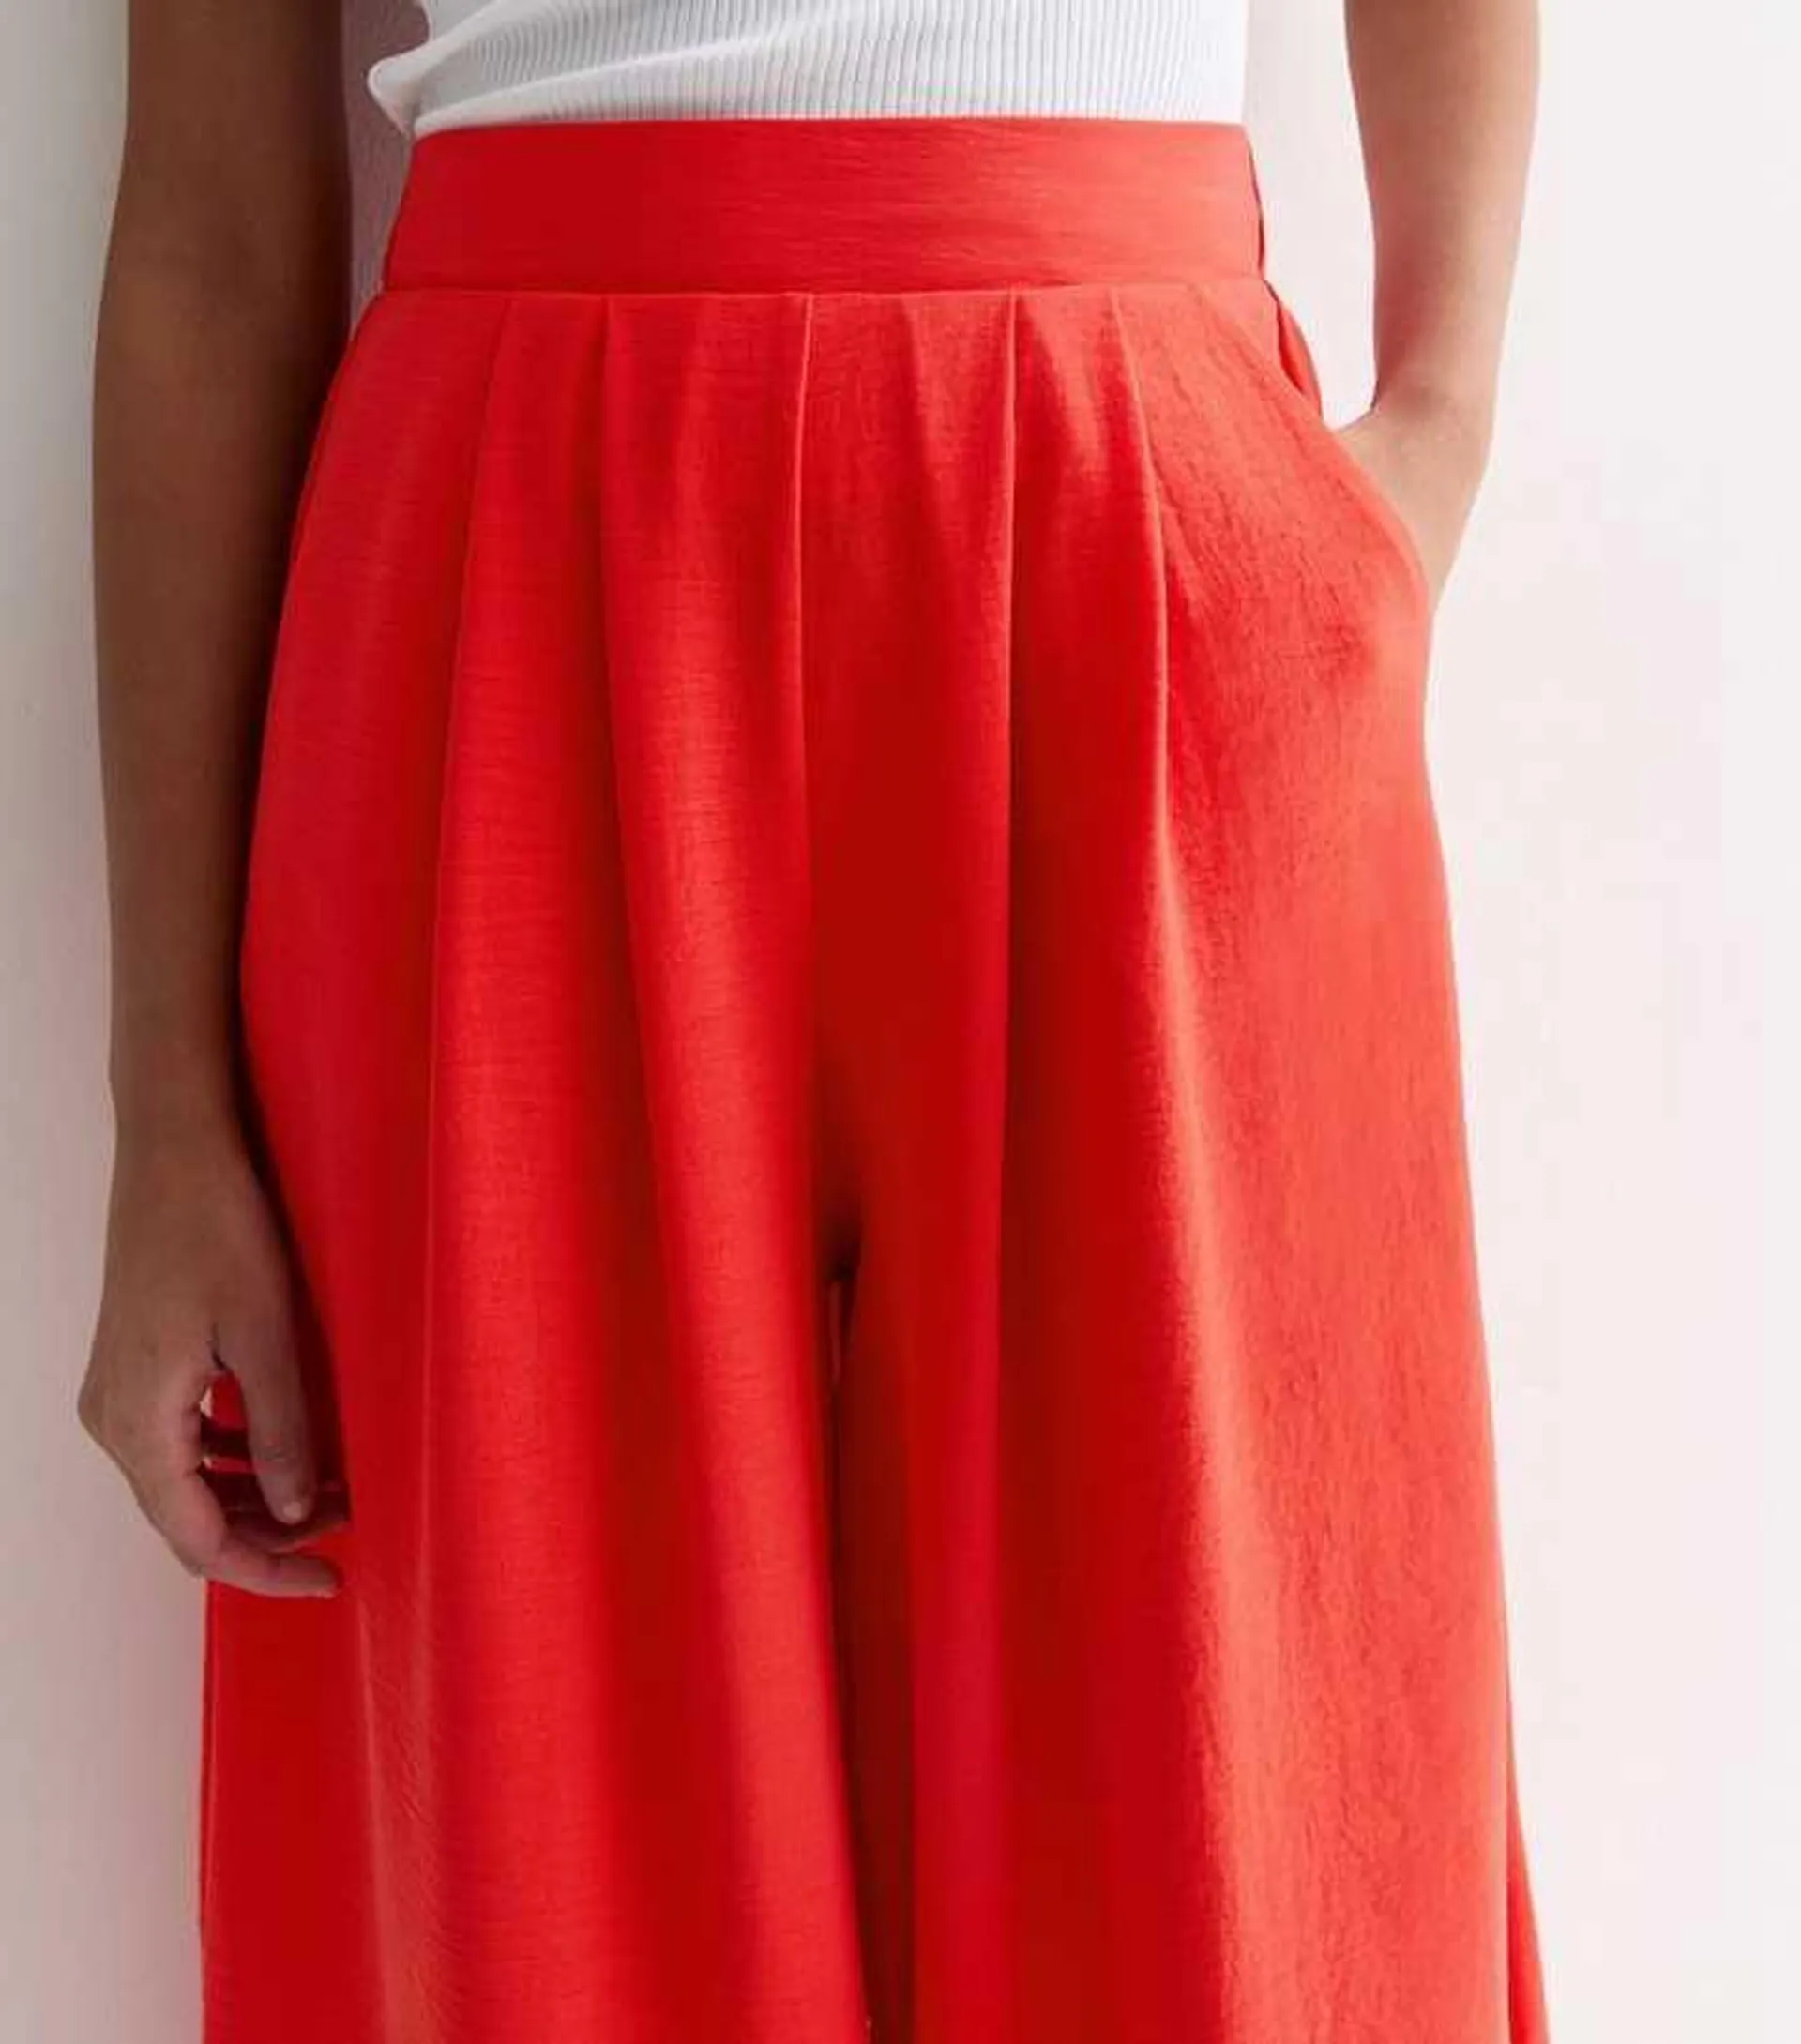 Red Wide Leg Crop Trousers